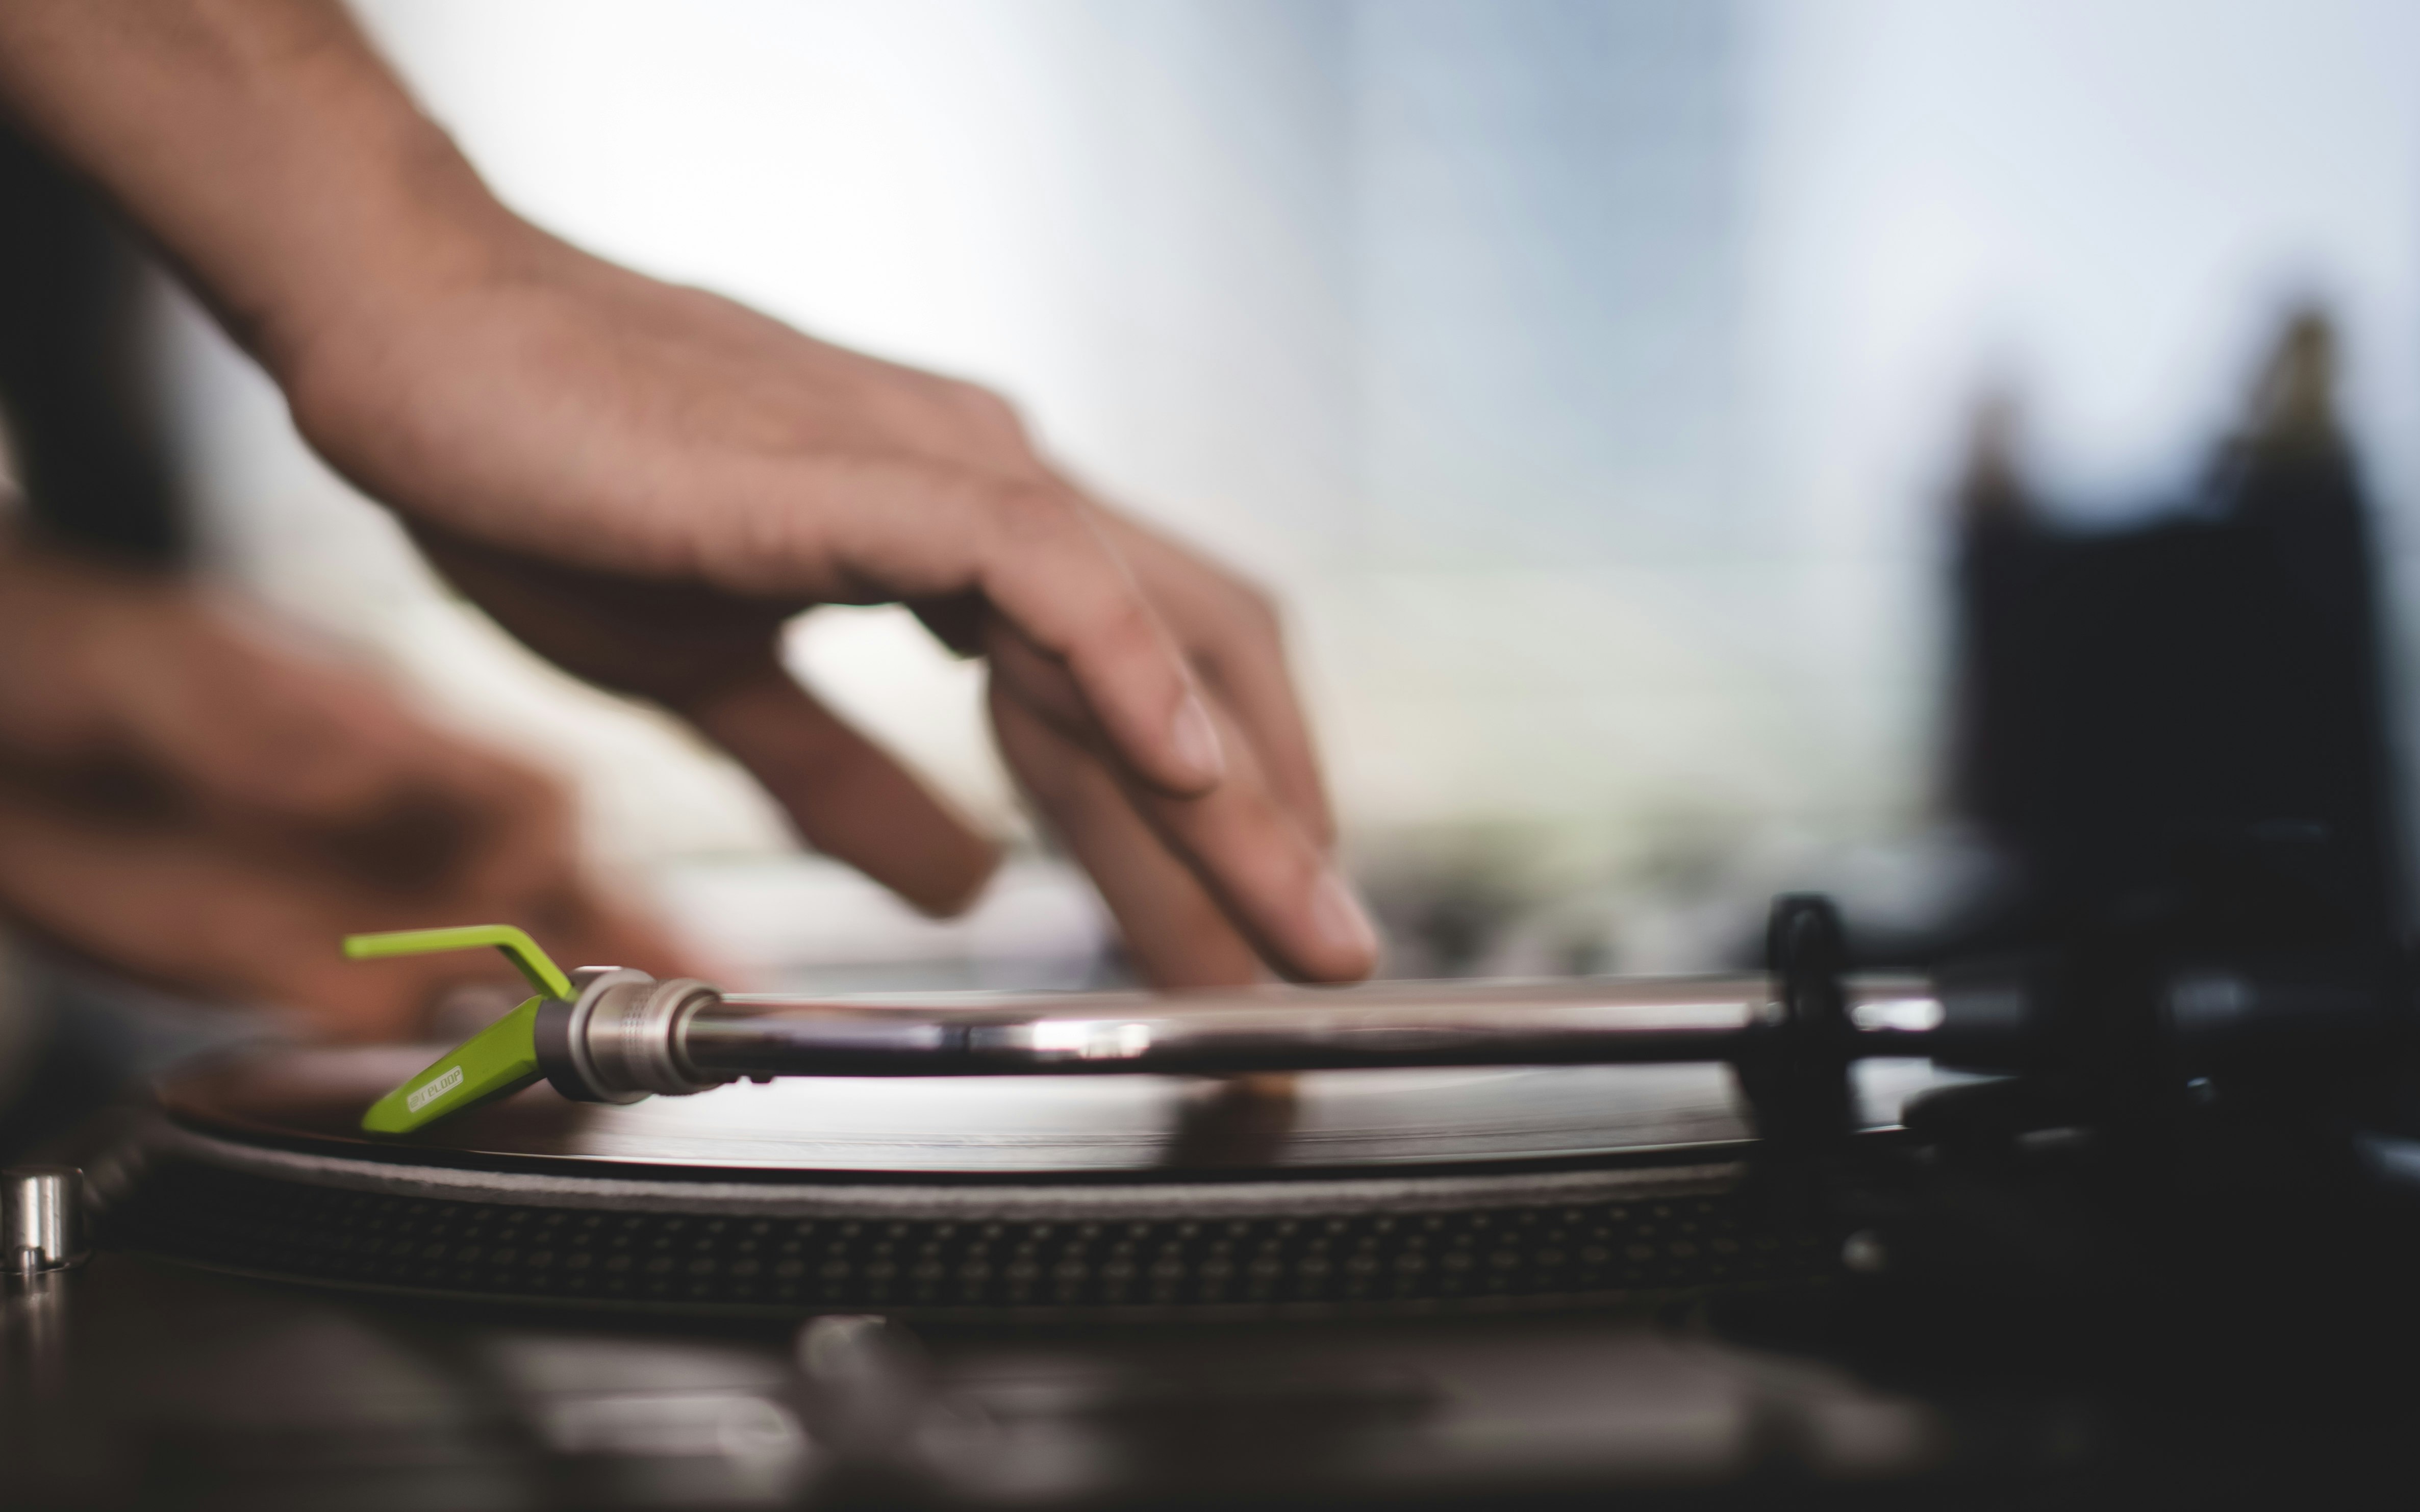 close-up photo of person using turntable